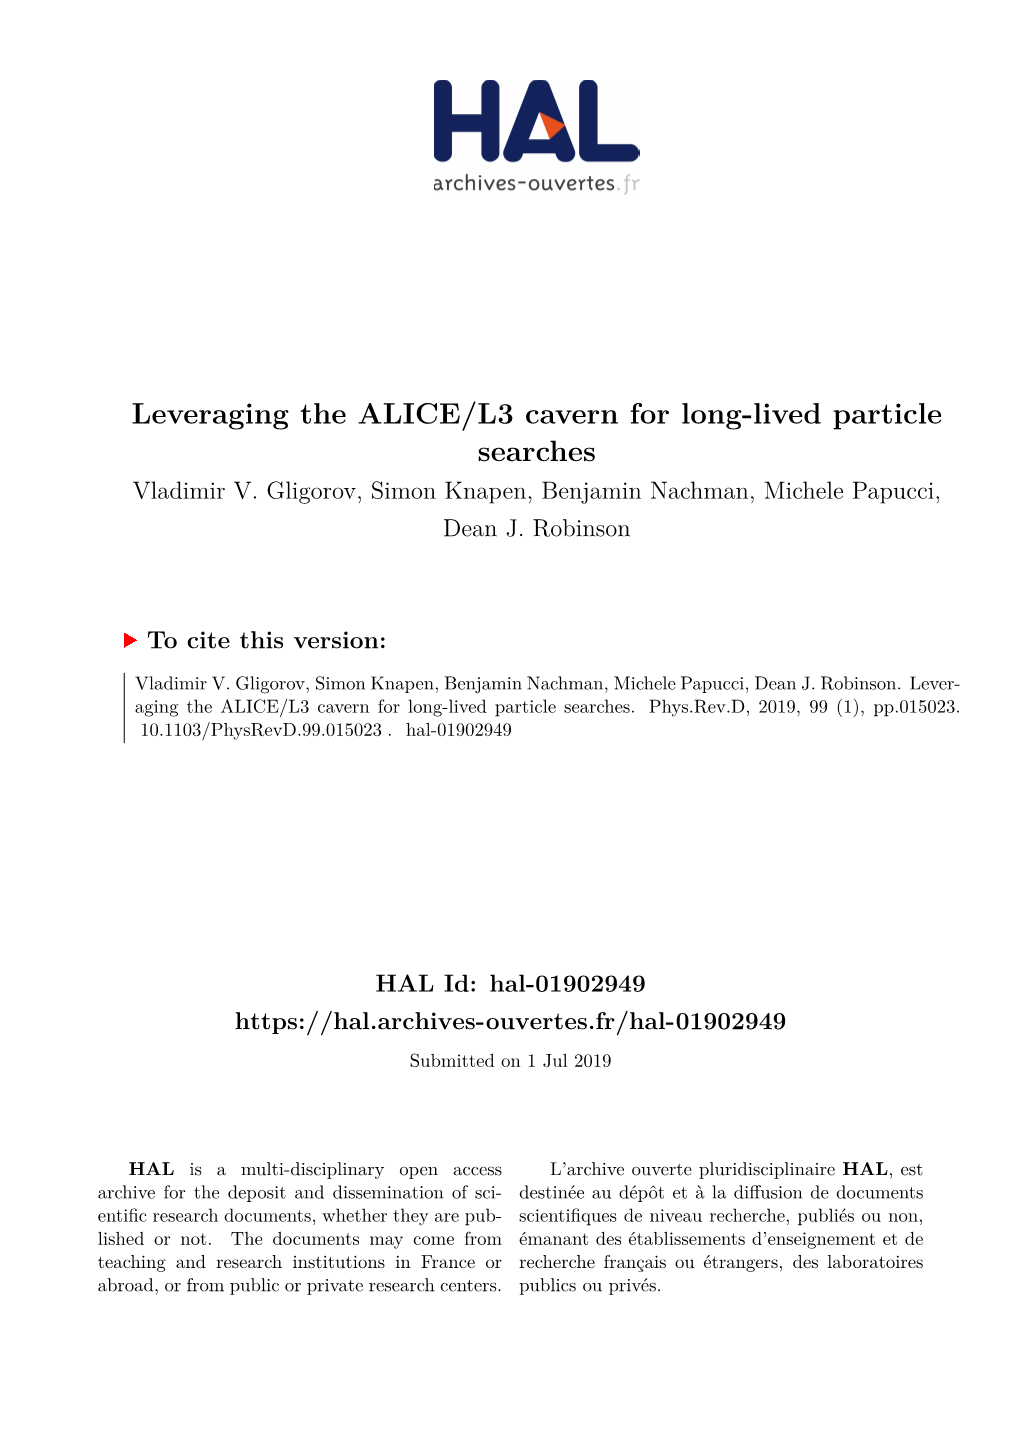 Leveraging the ALICE/L3 Cavern for Long-Lived Particle Searches Vladimir V